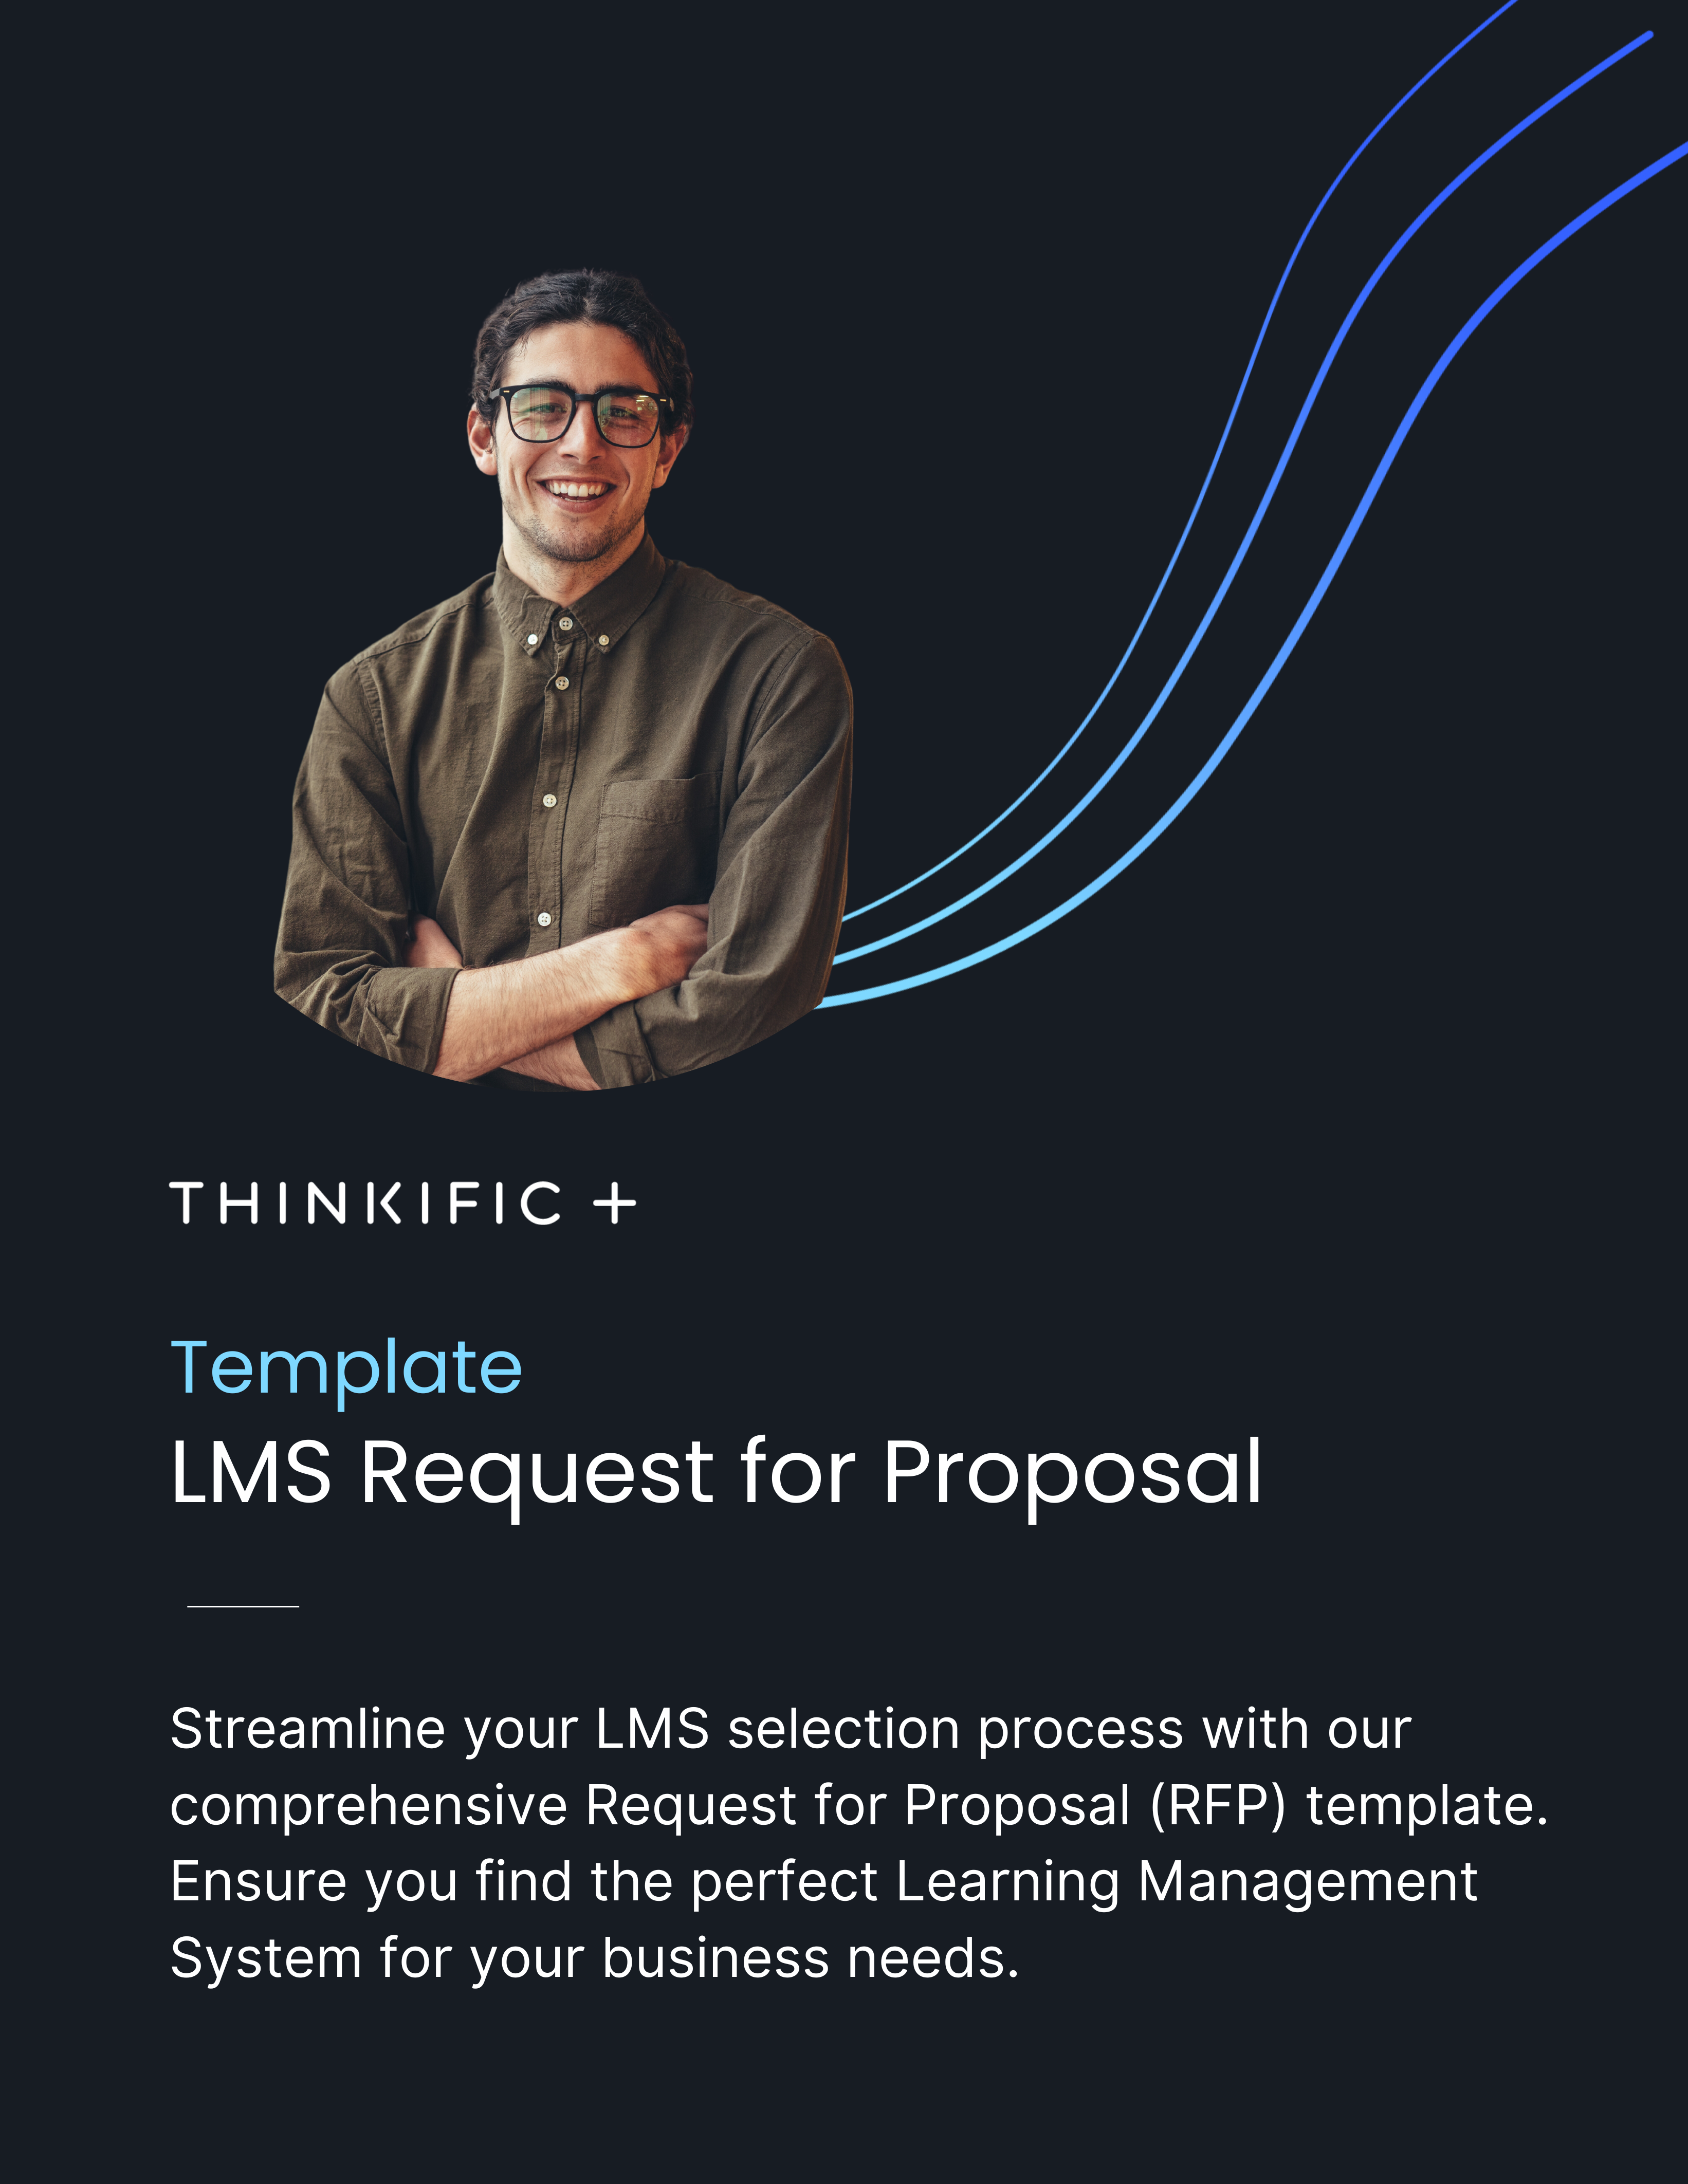 Unlock the Perfect Learning Management System: Get Your LMS RFP Template Now